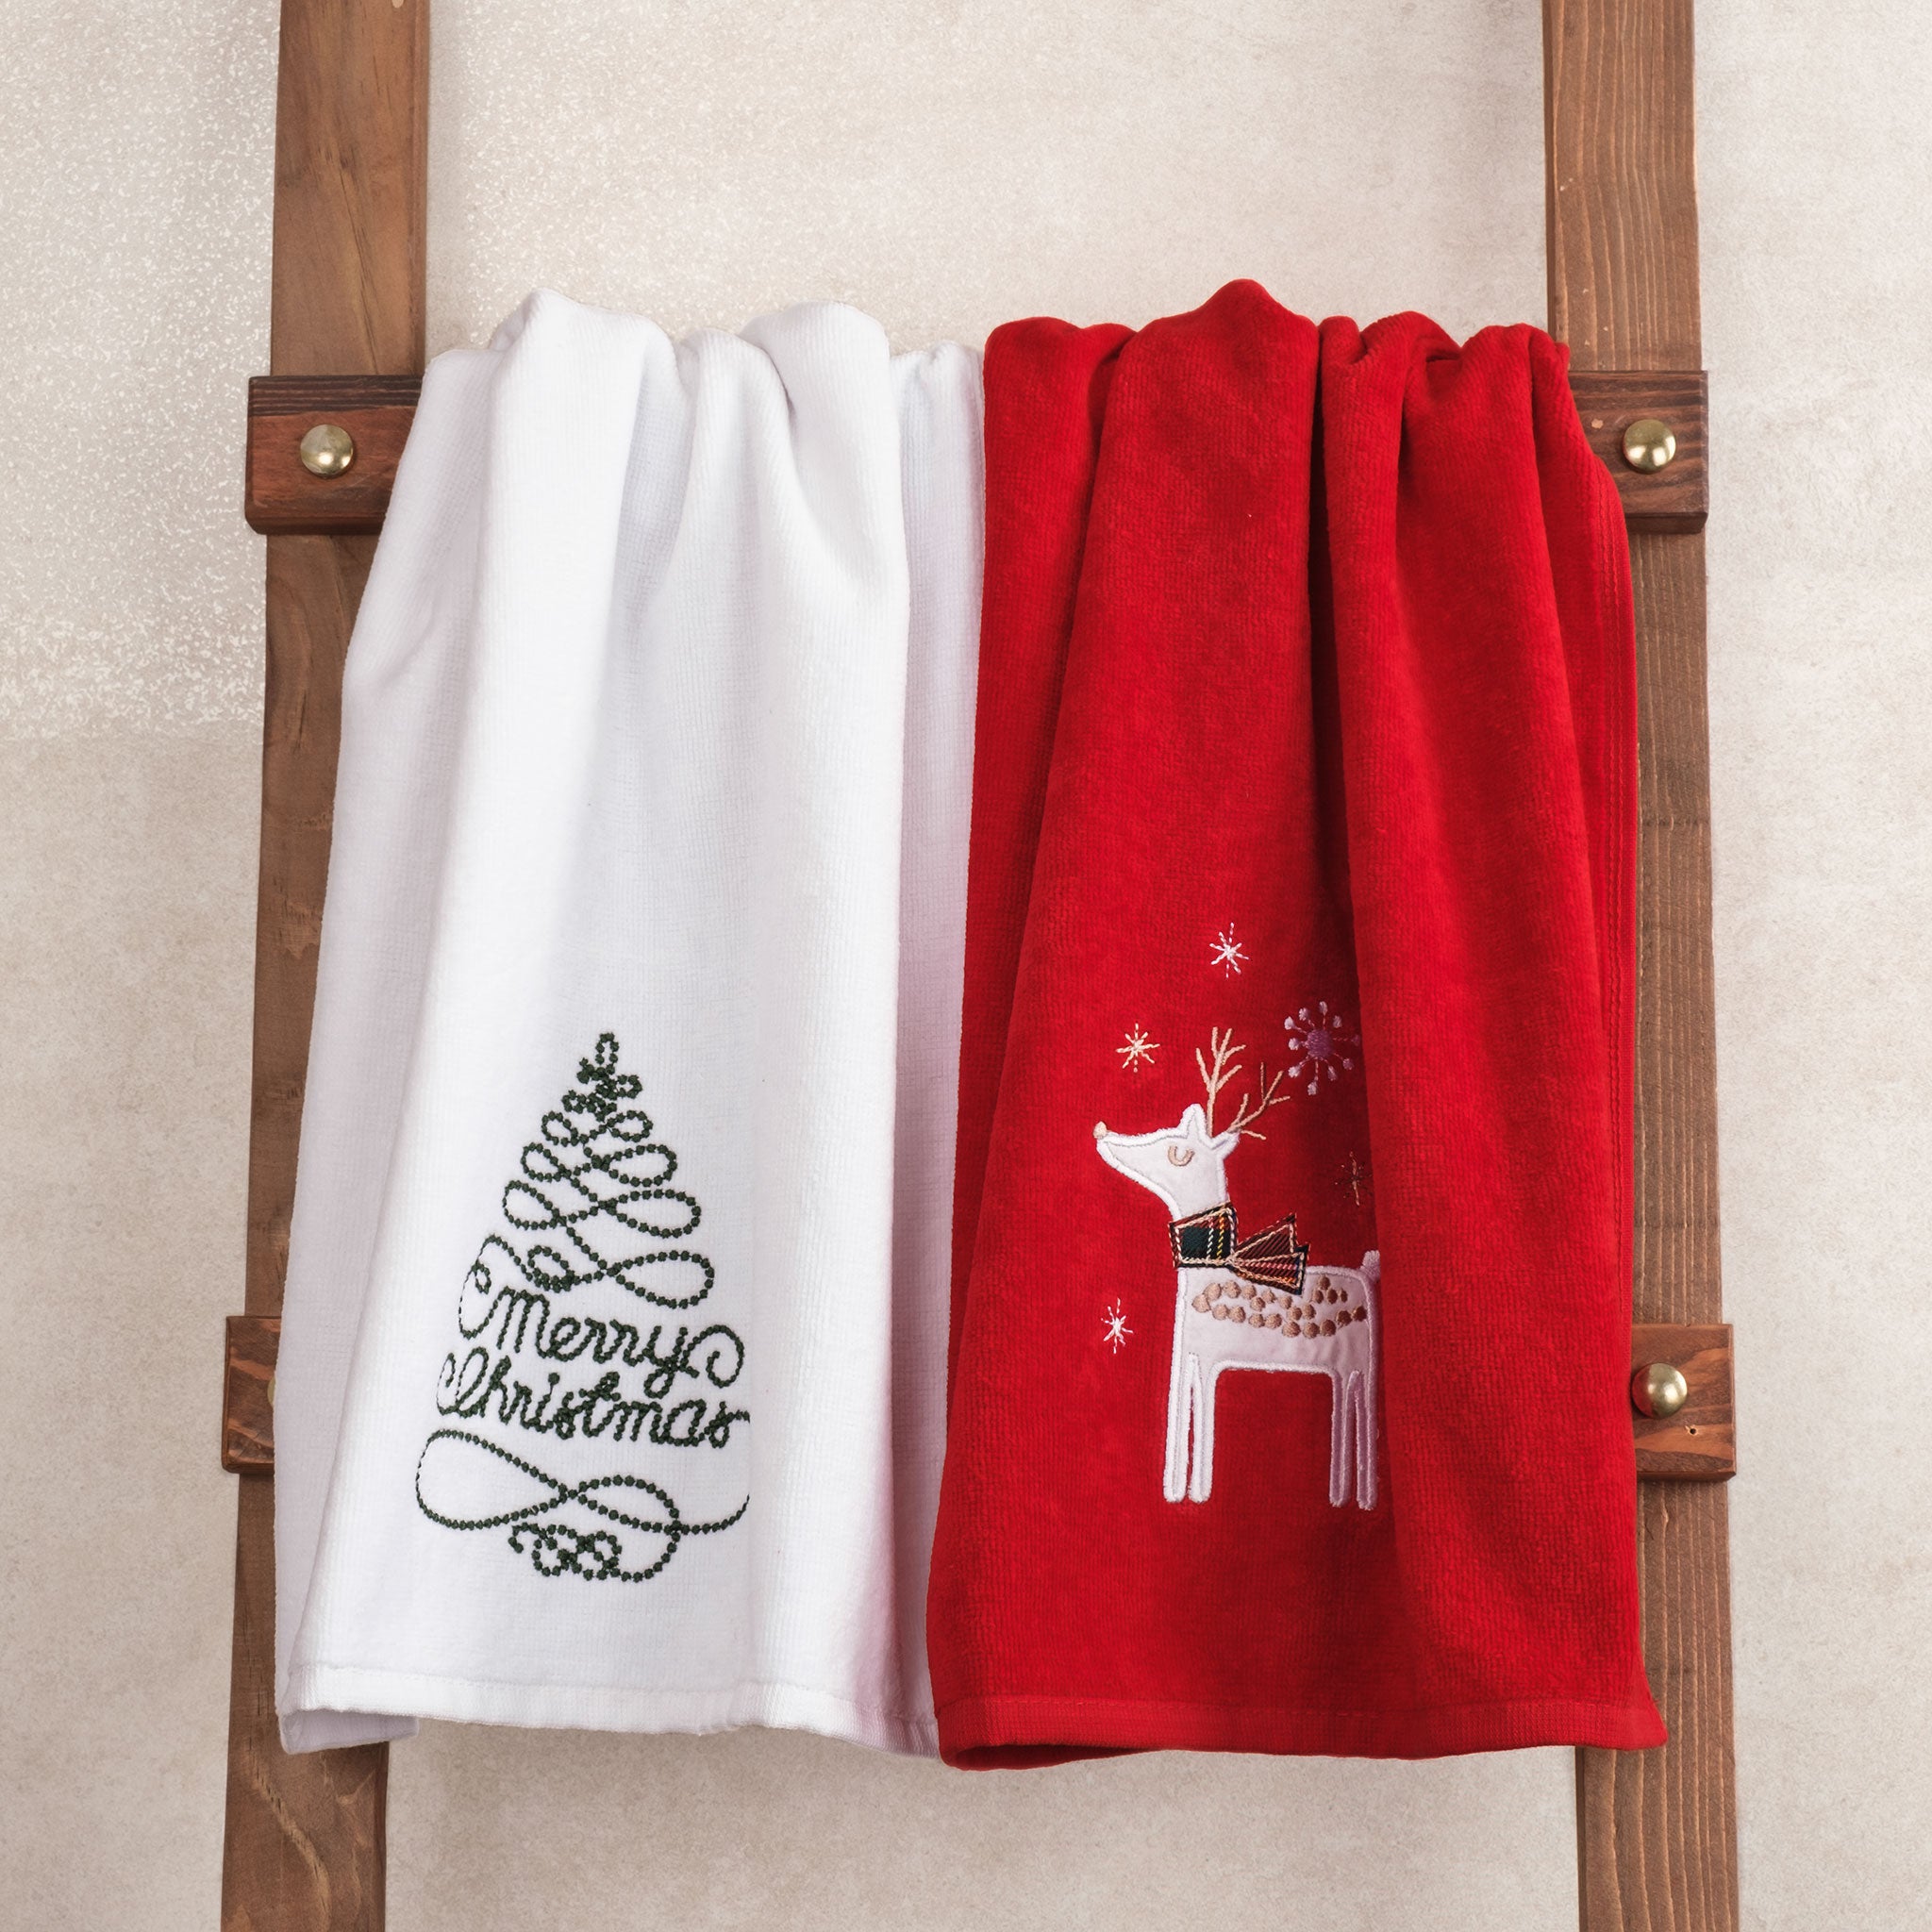 American Soft Linen - Christmas Towels 2  Packed Embroidered Towels for Decor Xmas - 60 Set Case Pack - Merry Tree-Deery - 1